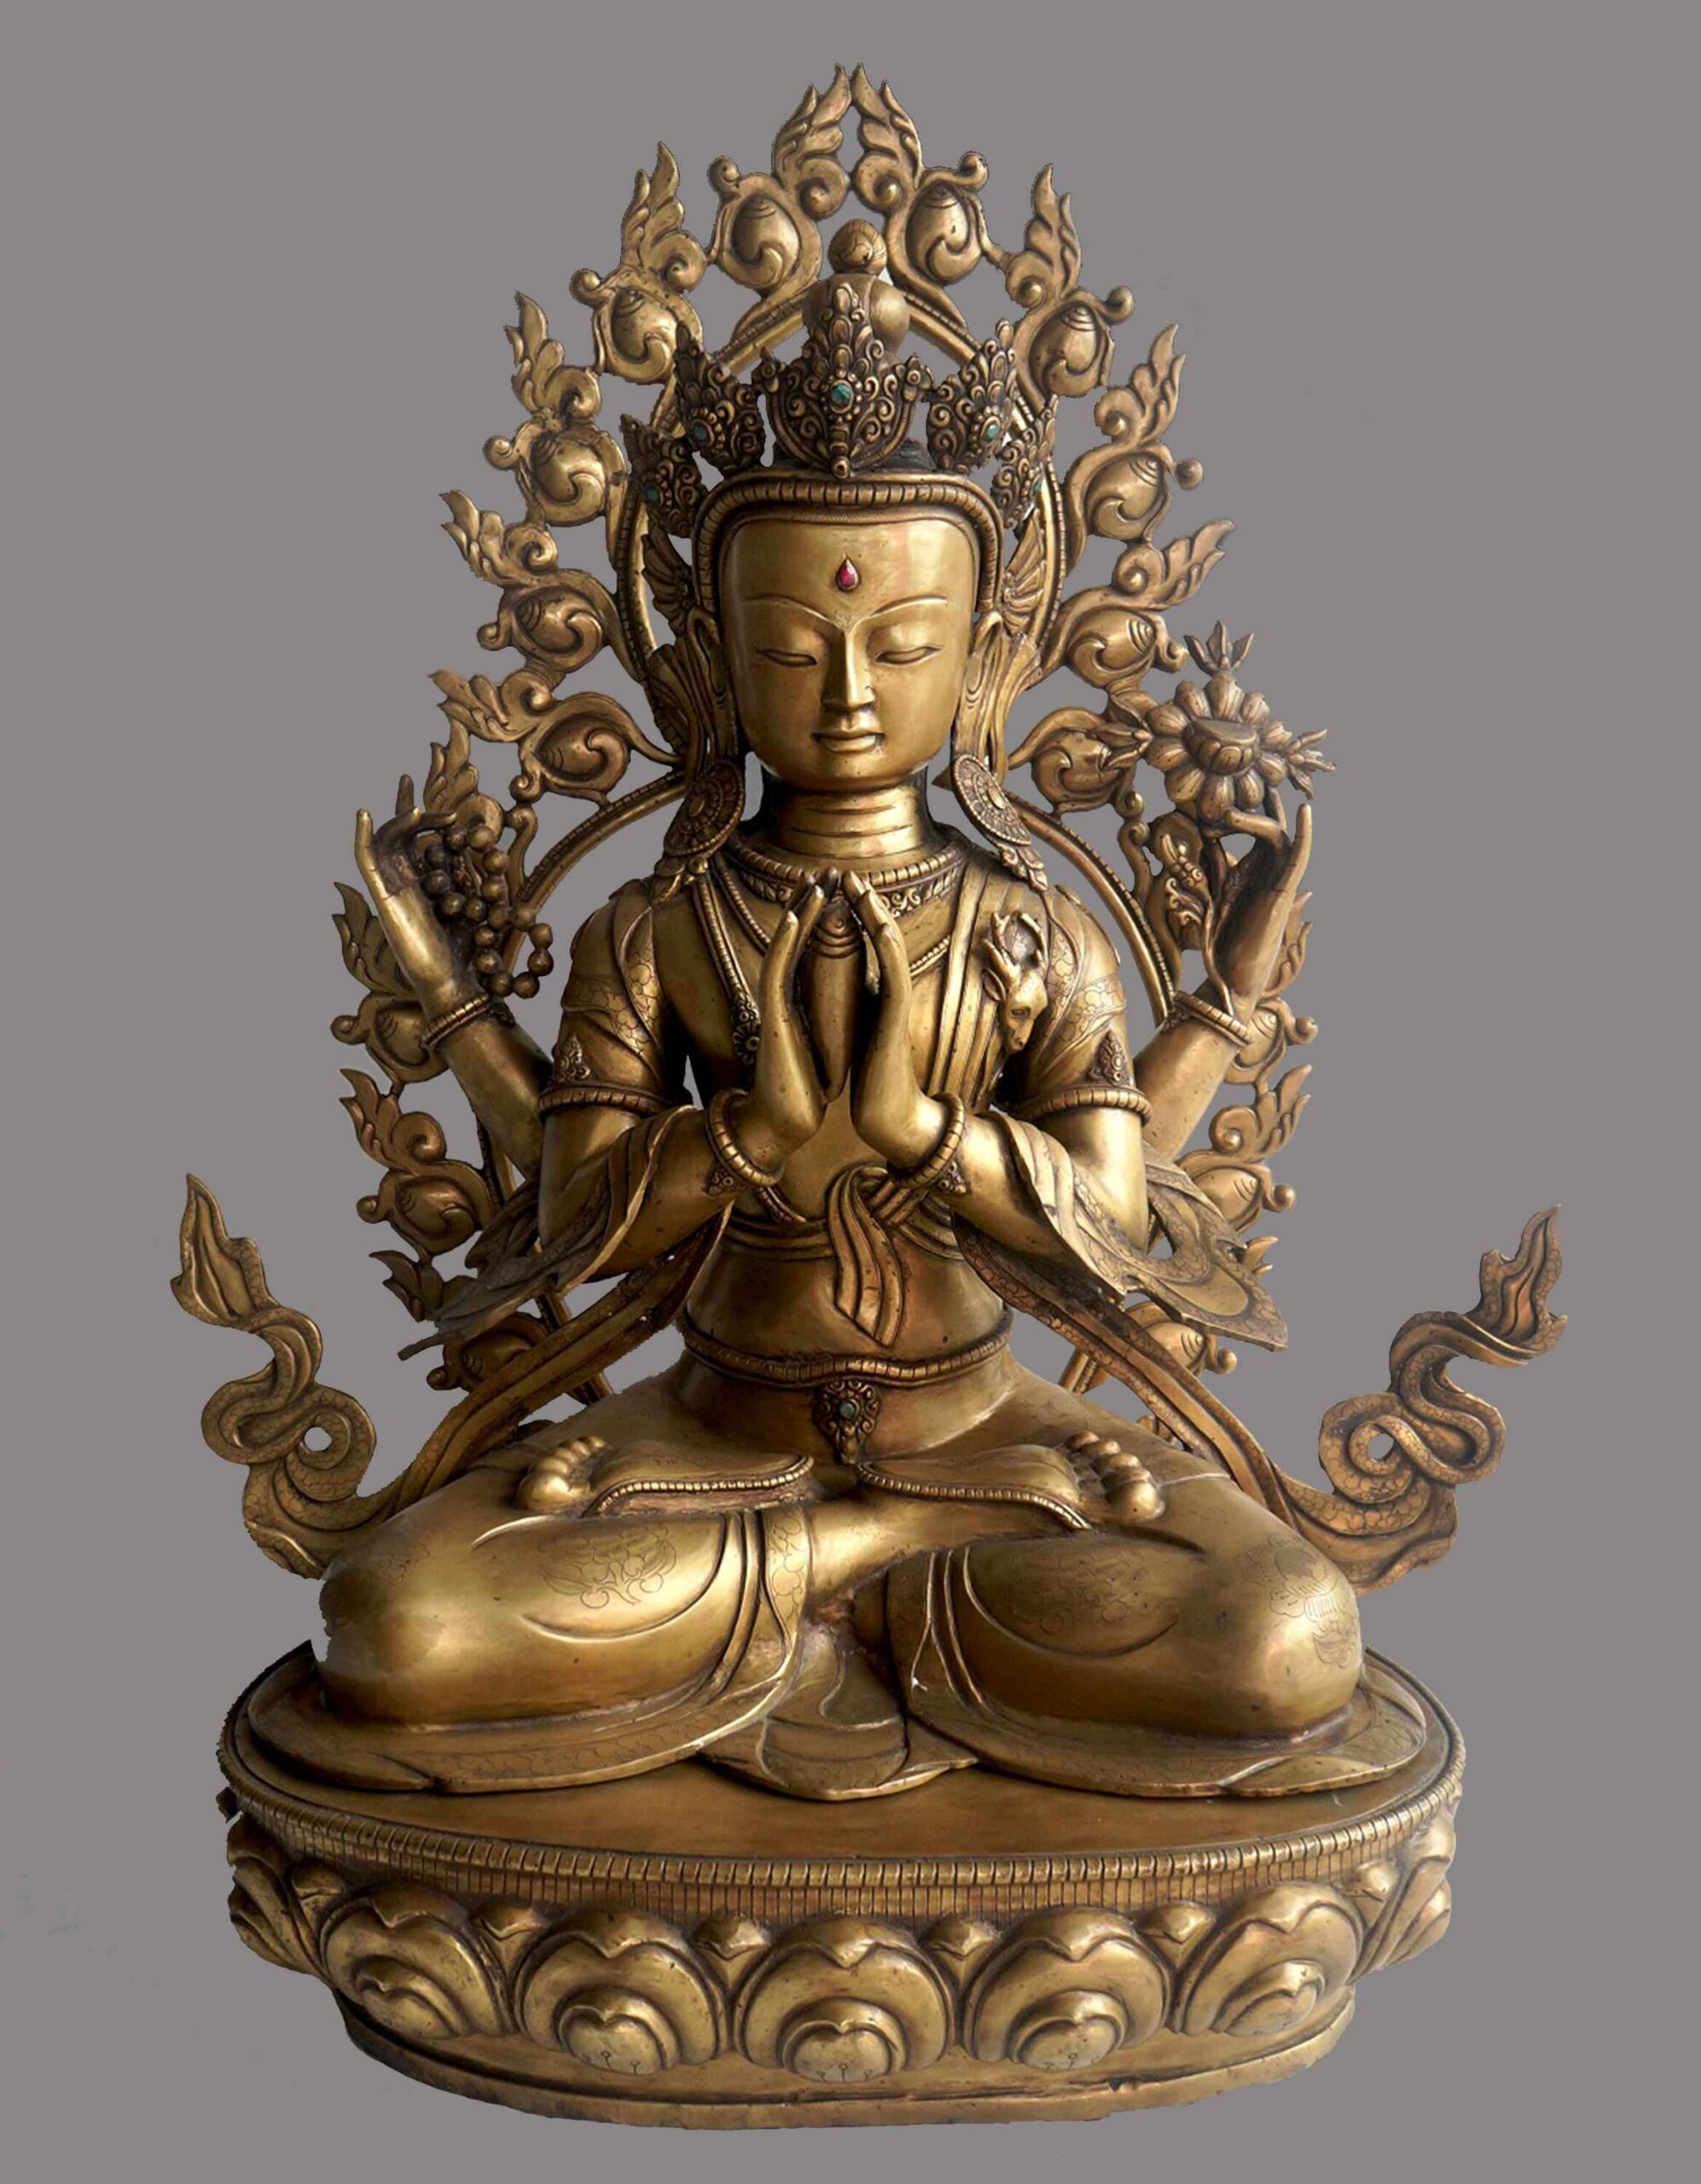 The Buddha complete - New (1)